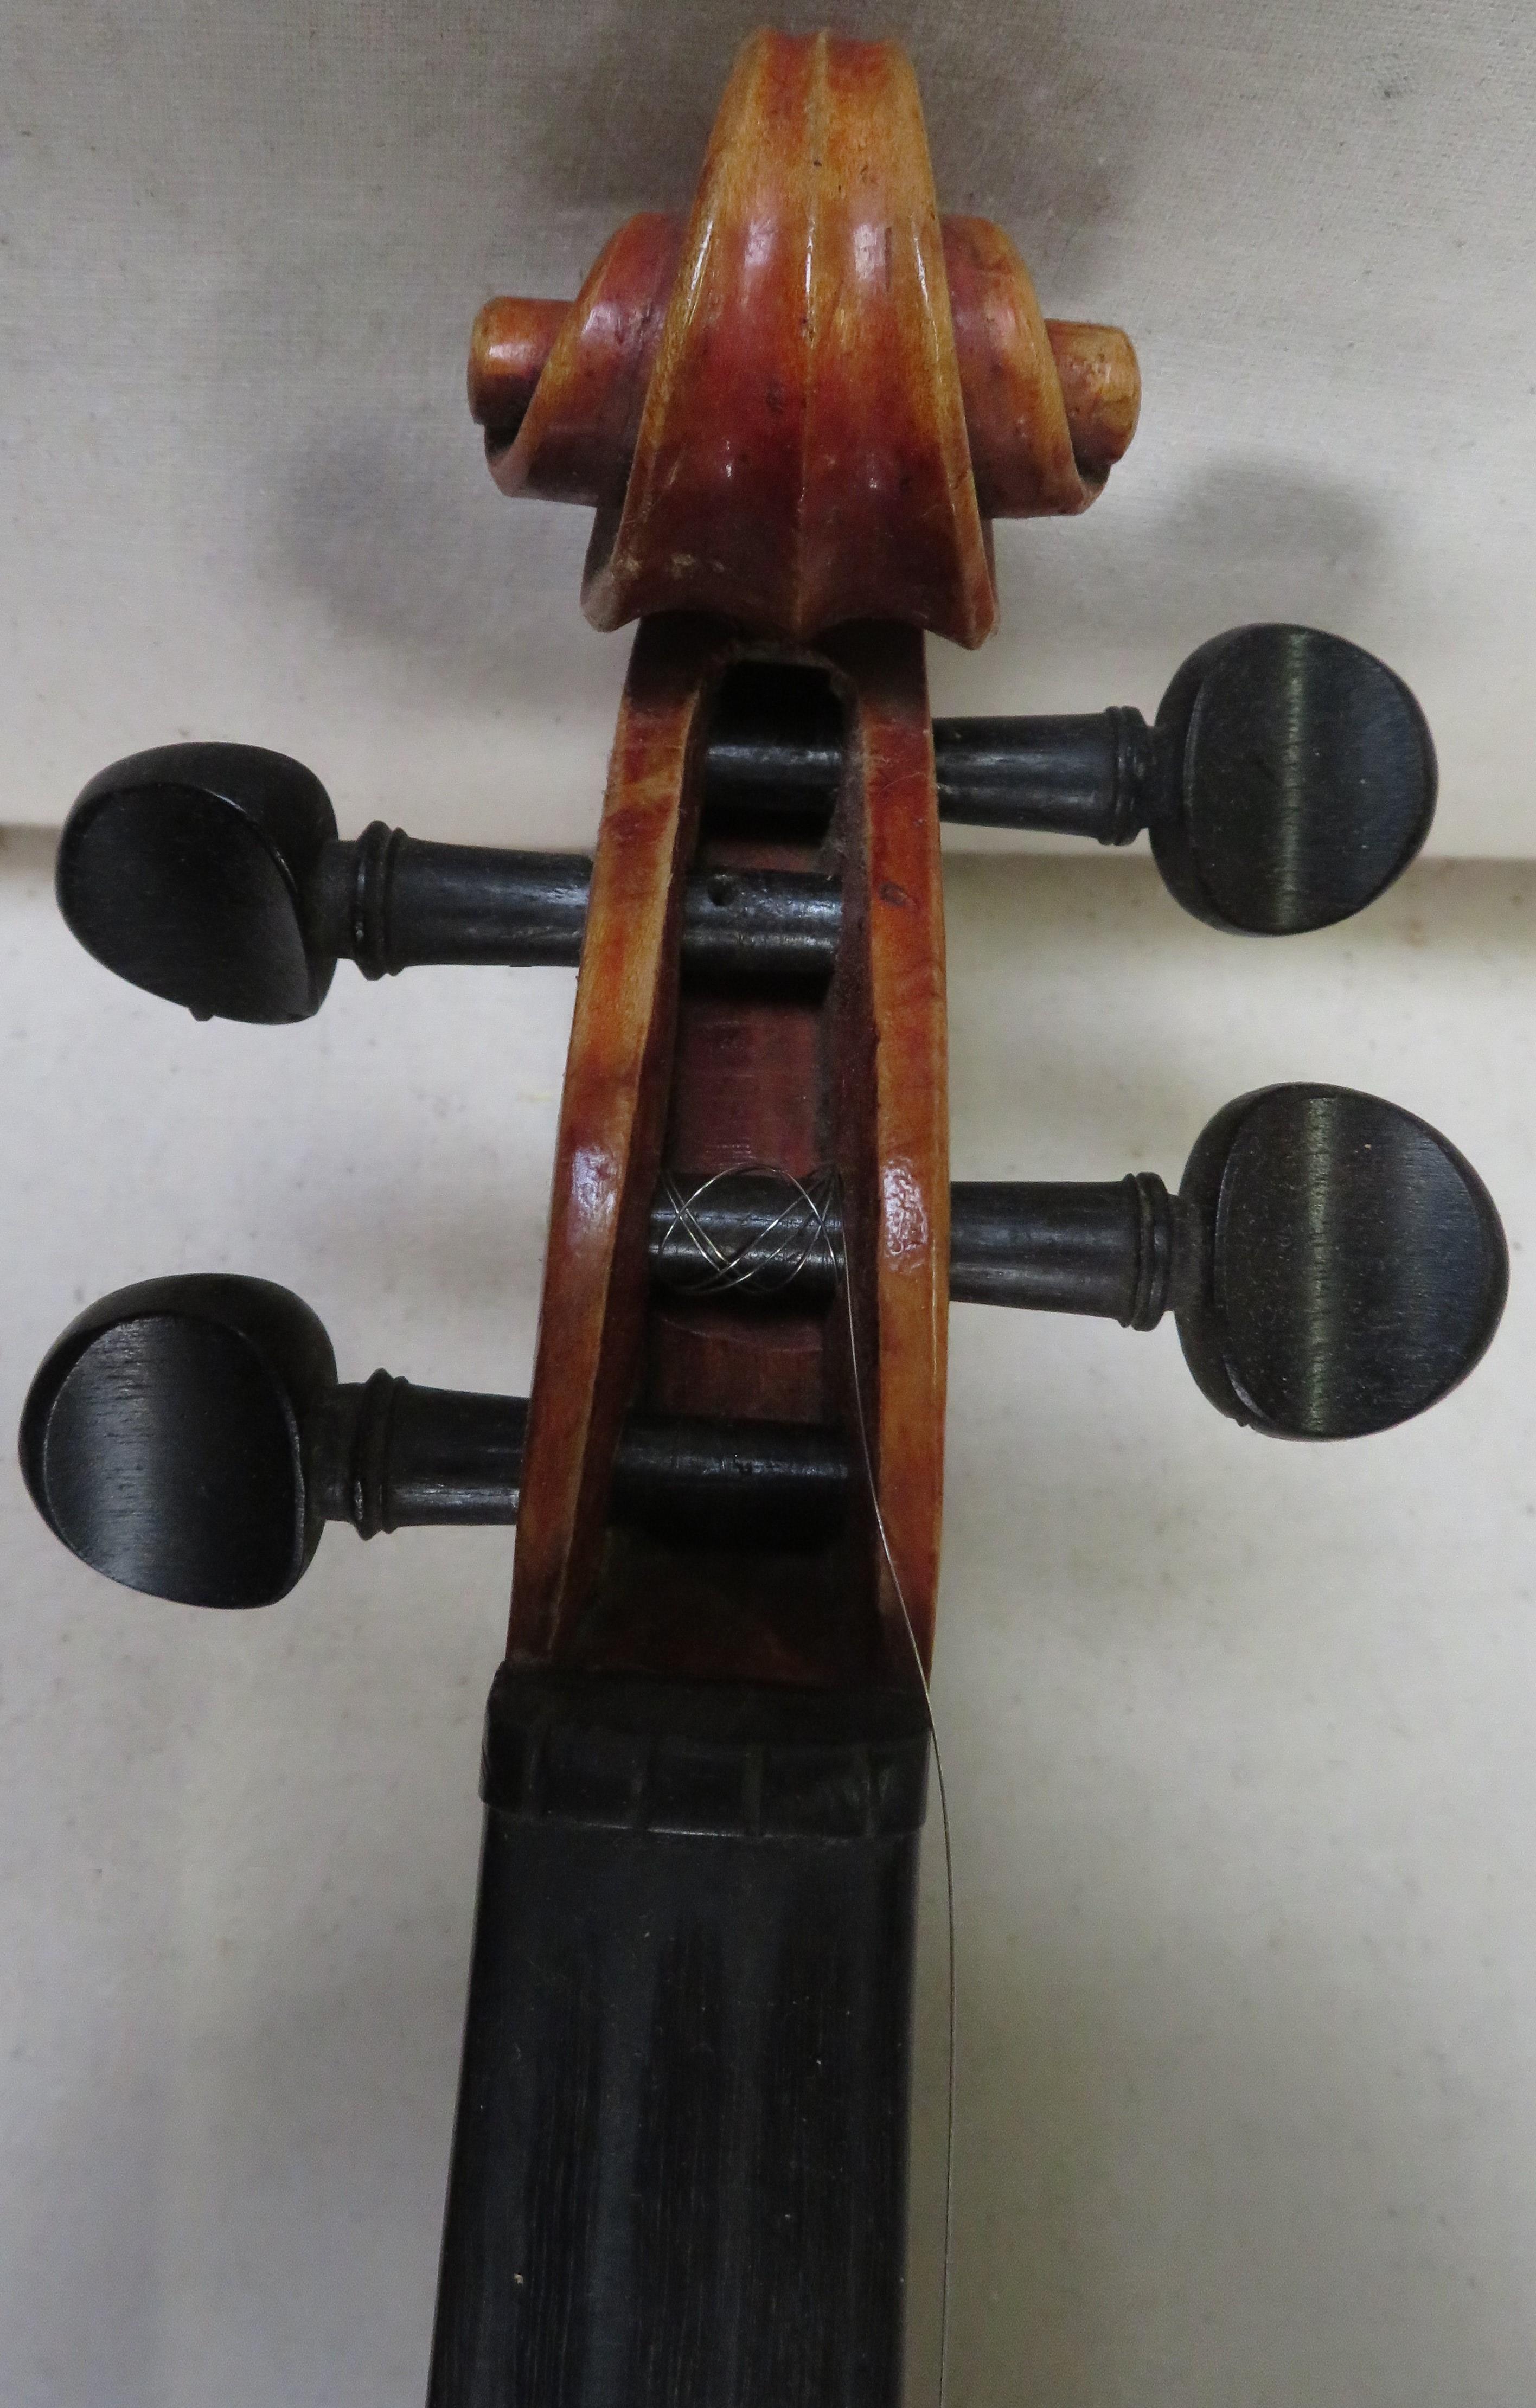 A violin labelled The Metro Violin Class Organisation and bow labelled Bausch copy"" - Image 5 of 7